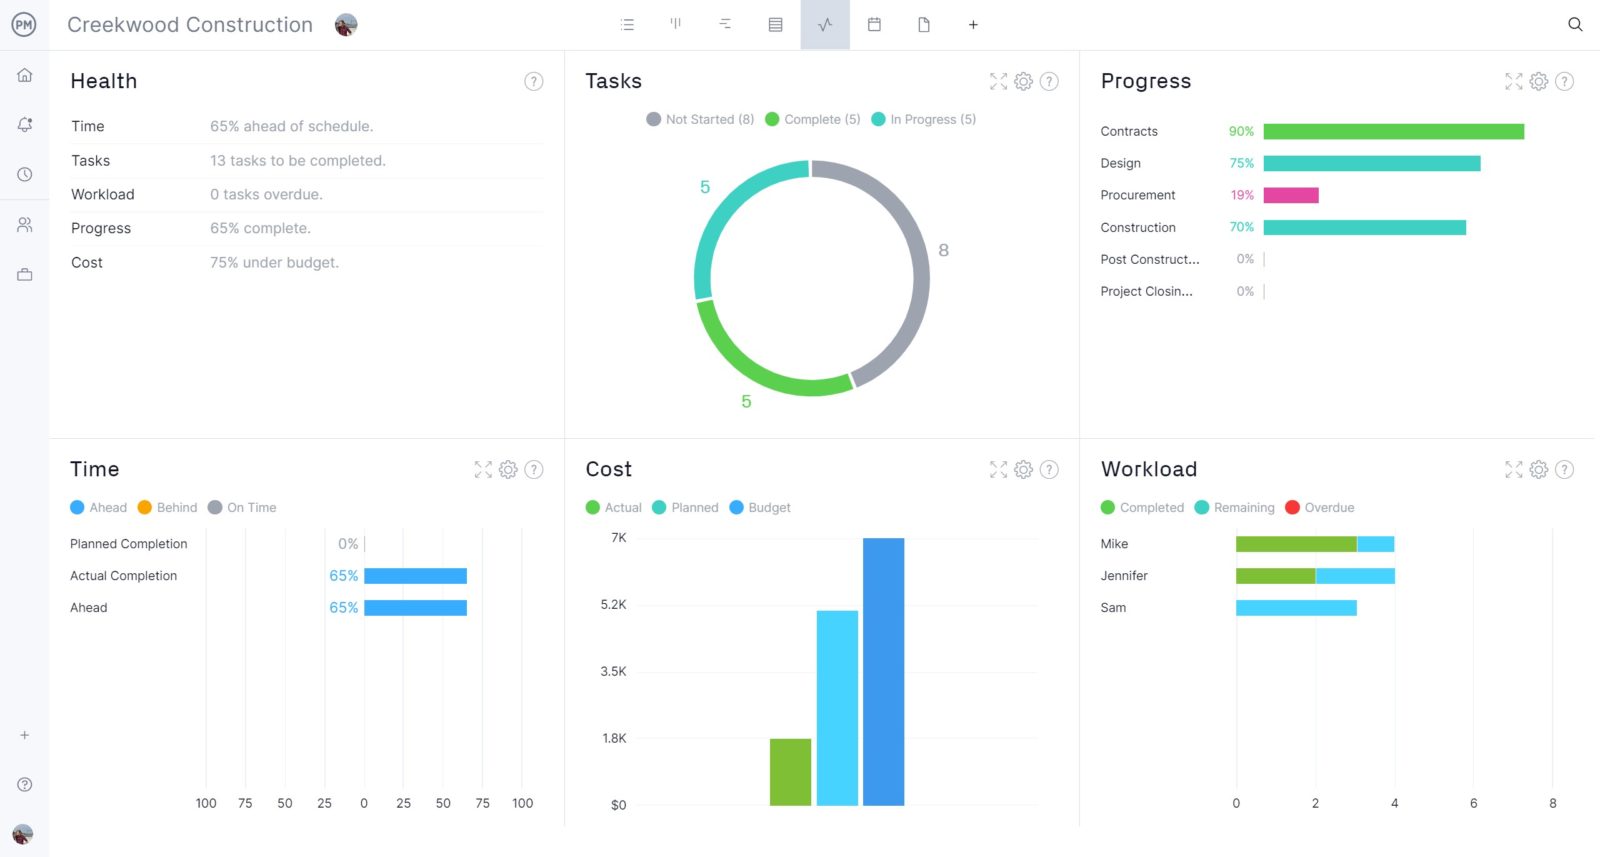 dashboard showing project metrics in real-time